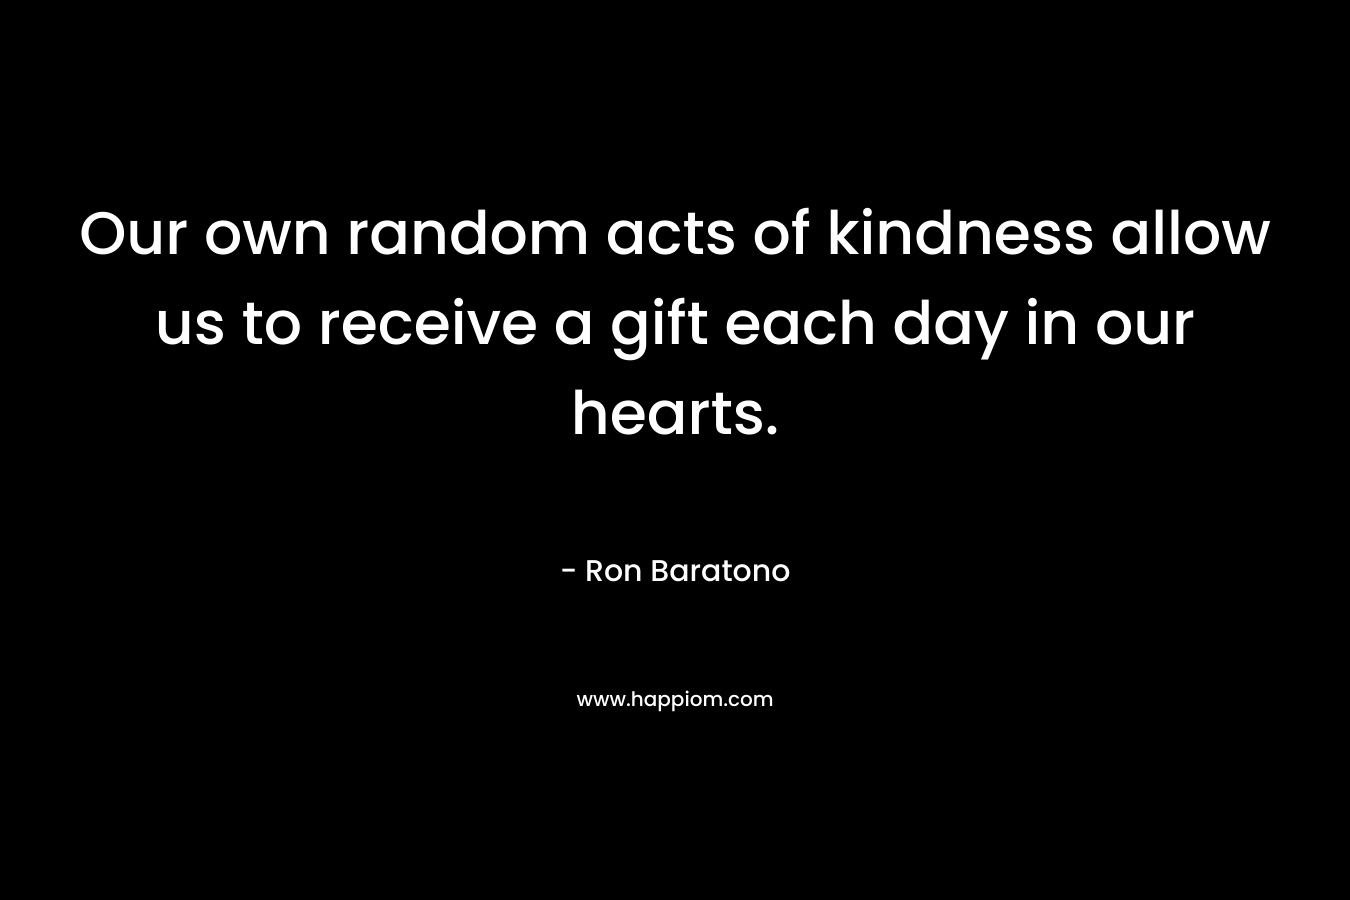 Our own random acts of kindness allow us to receive a gift each day in our hearts. – Ron Baratono